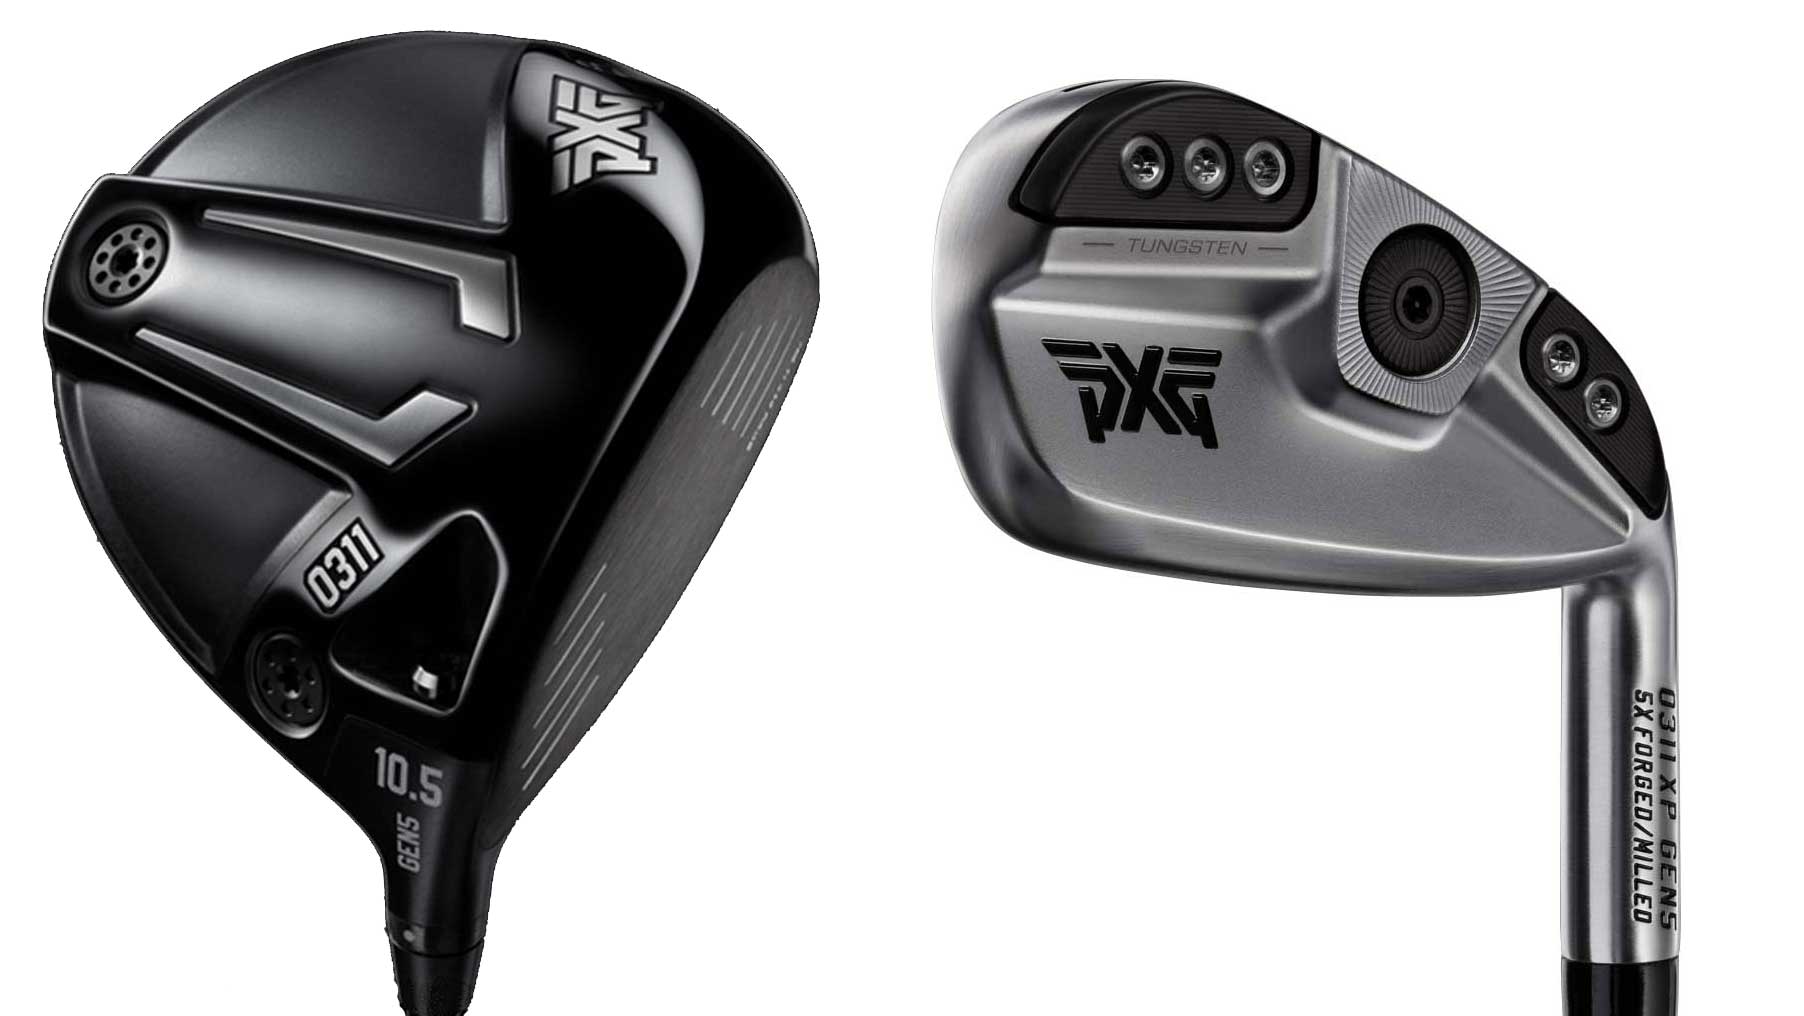 New PXG golf clubs for 2023 (drivers, irons, woods, hybrids) ClubTest